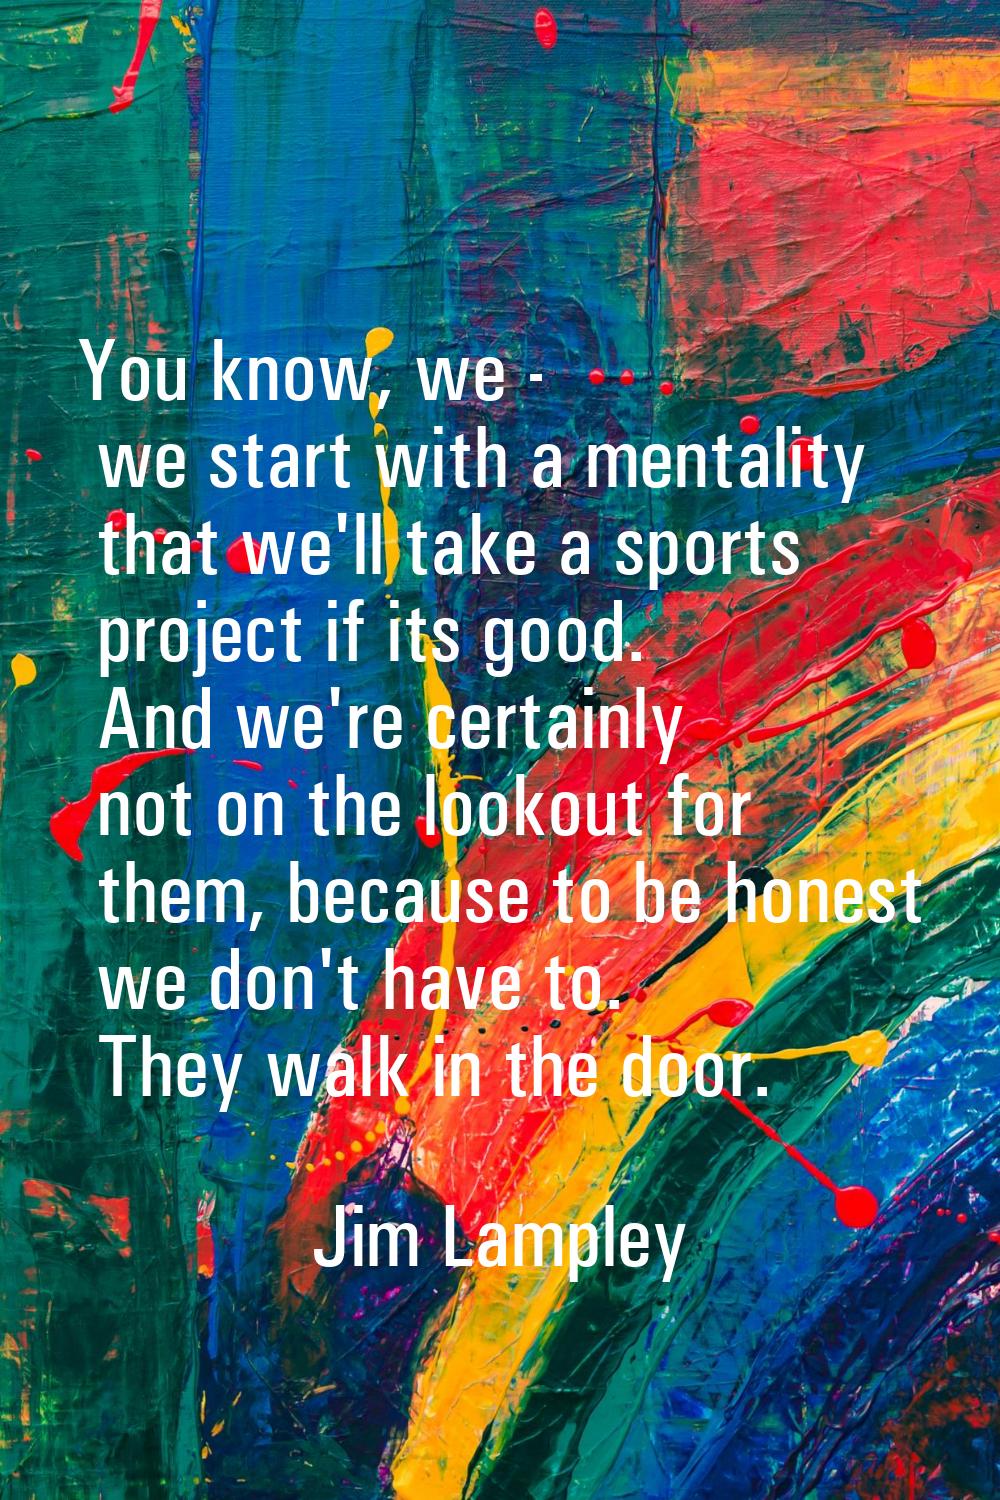 You know, we - we start with a mentality that we'll take a sports project if its good. And we're ce